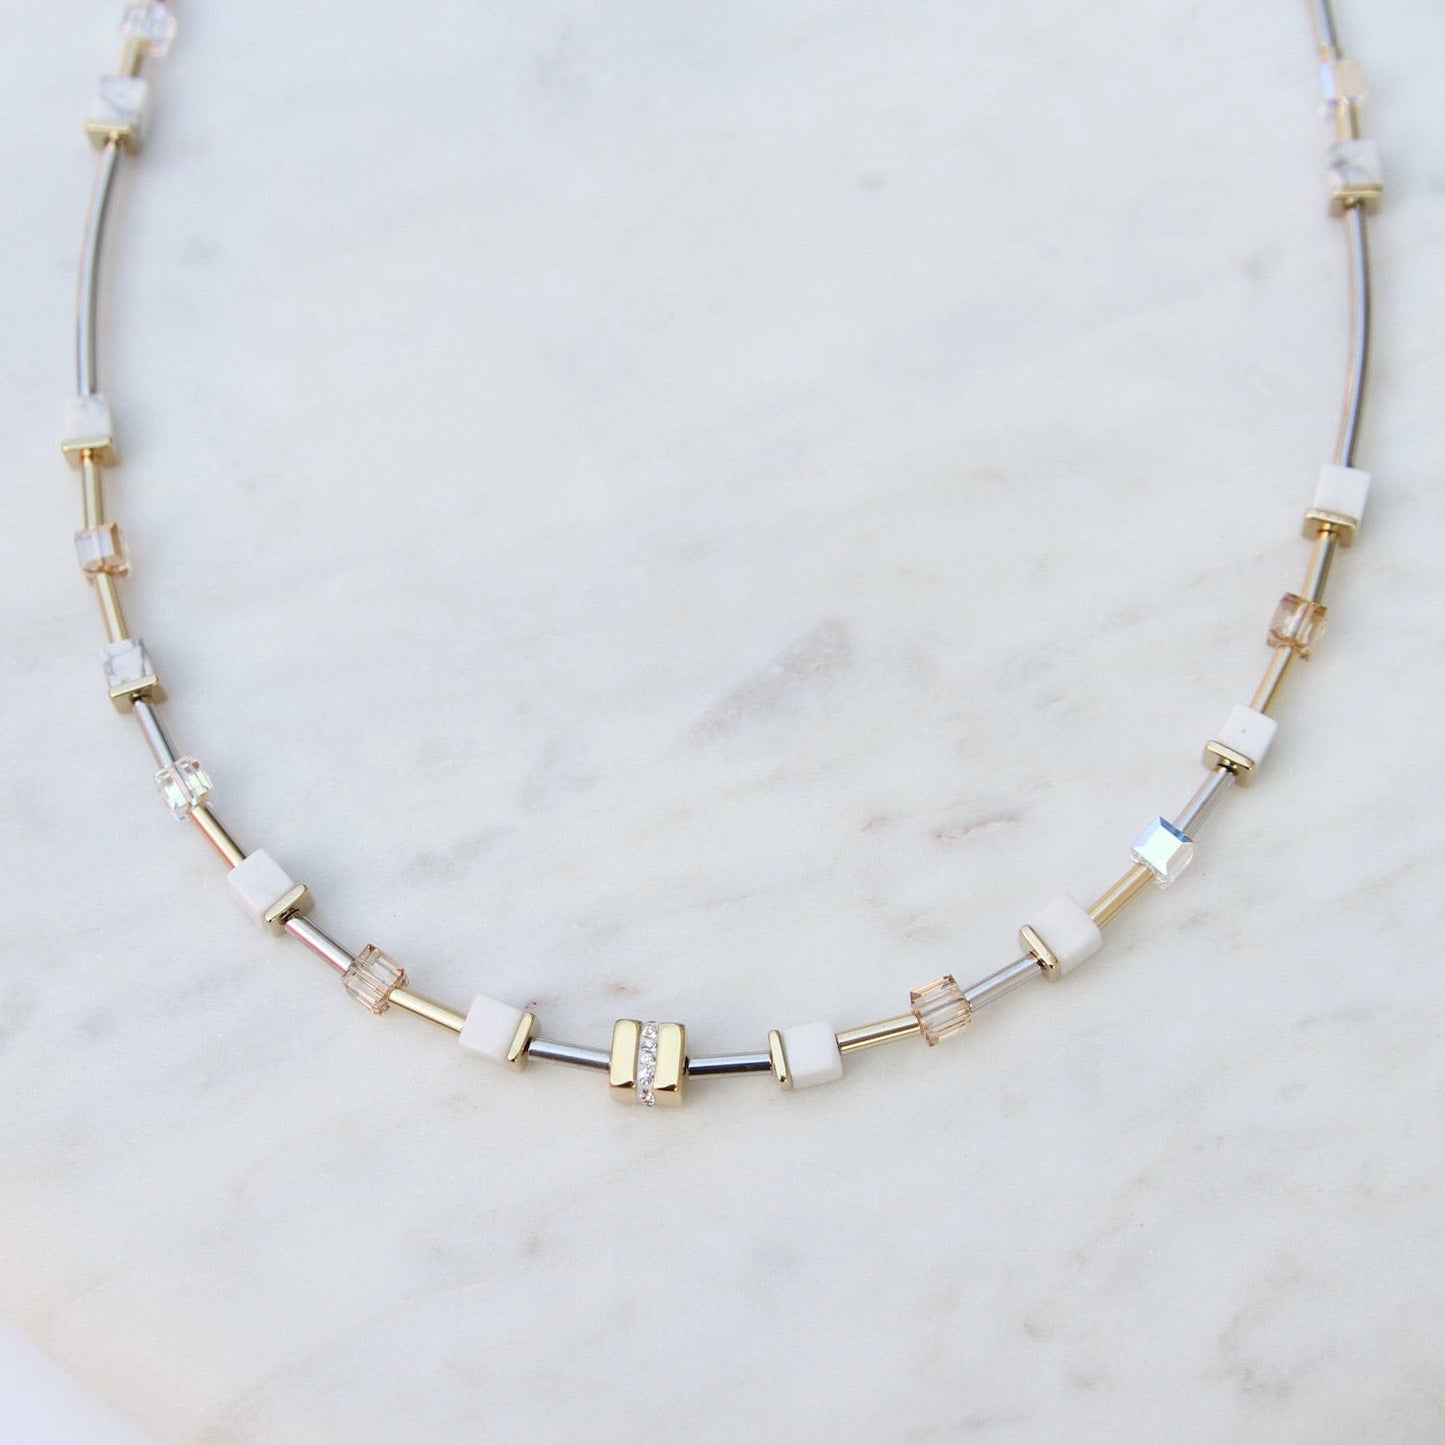 NKL Petite Howlite Geo Cube Necklace